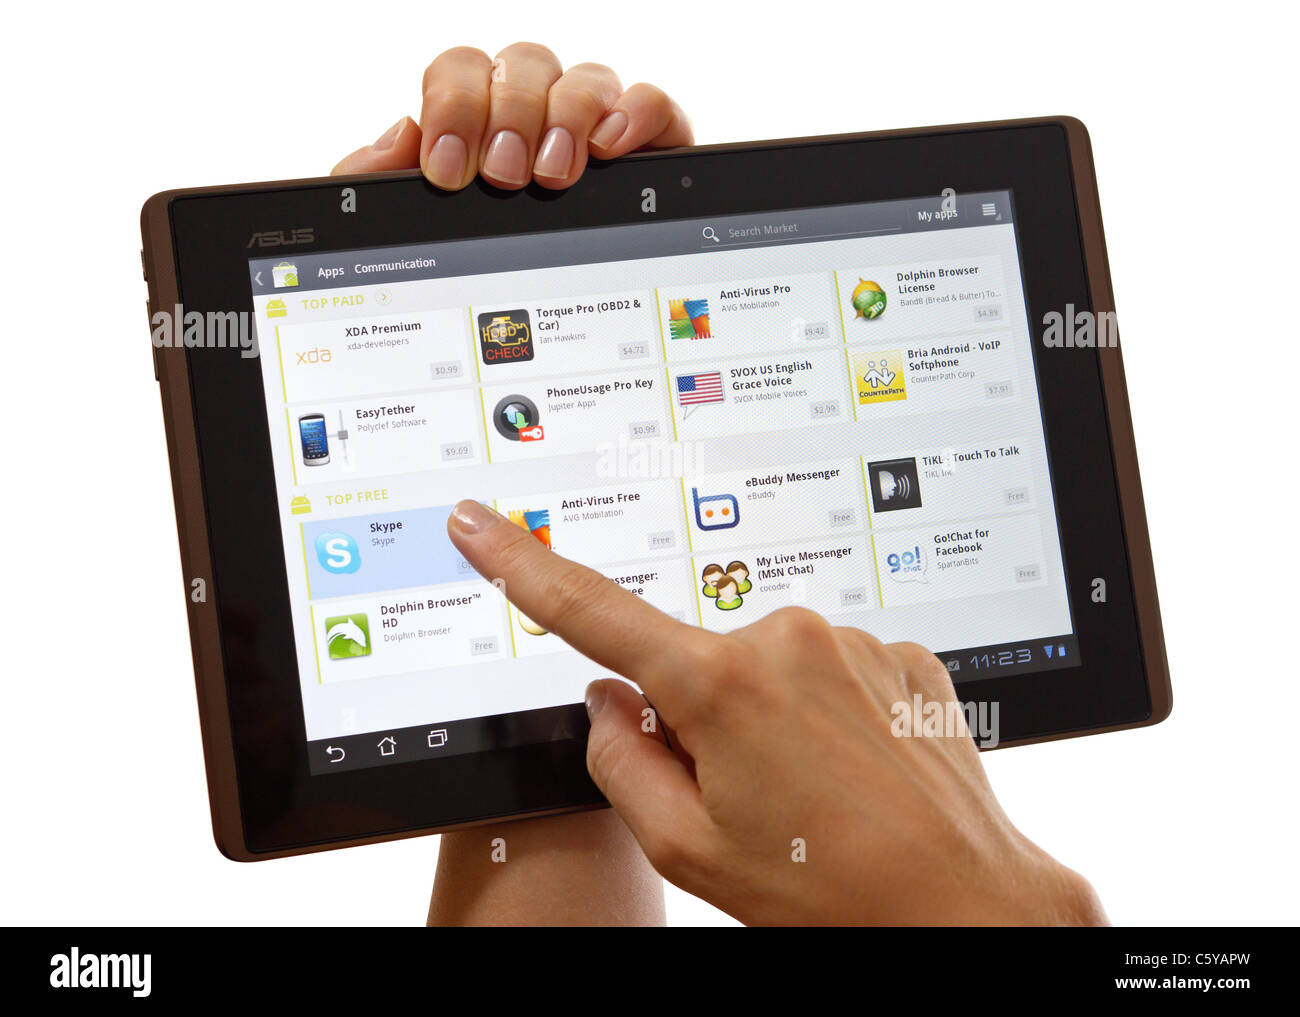 Android tablet, browing Android market, pressing Skype link Stock Photo